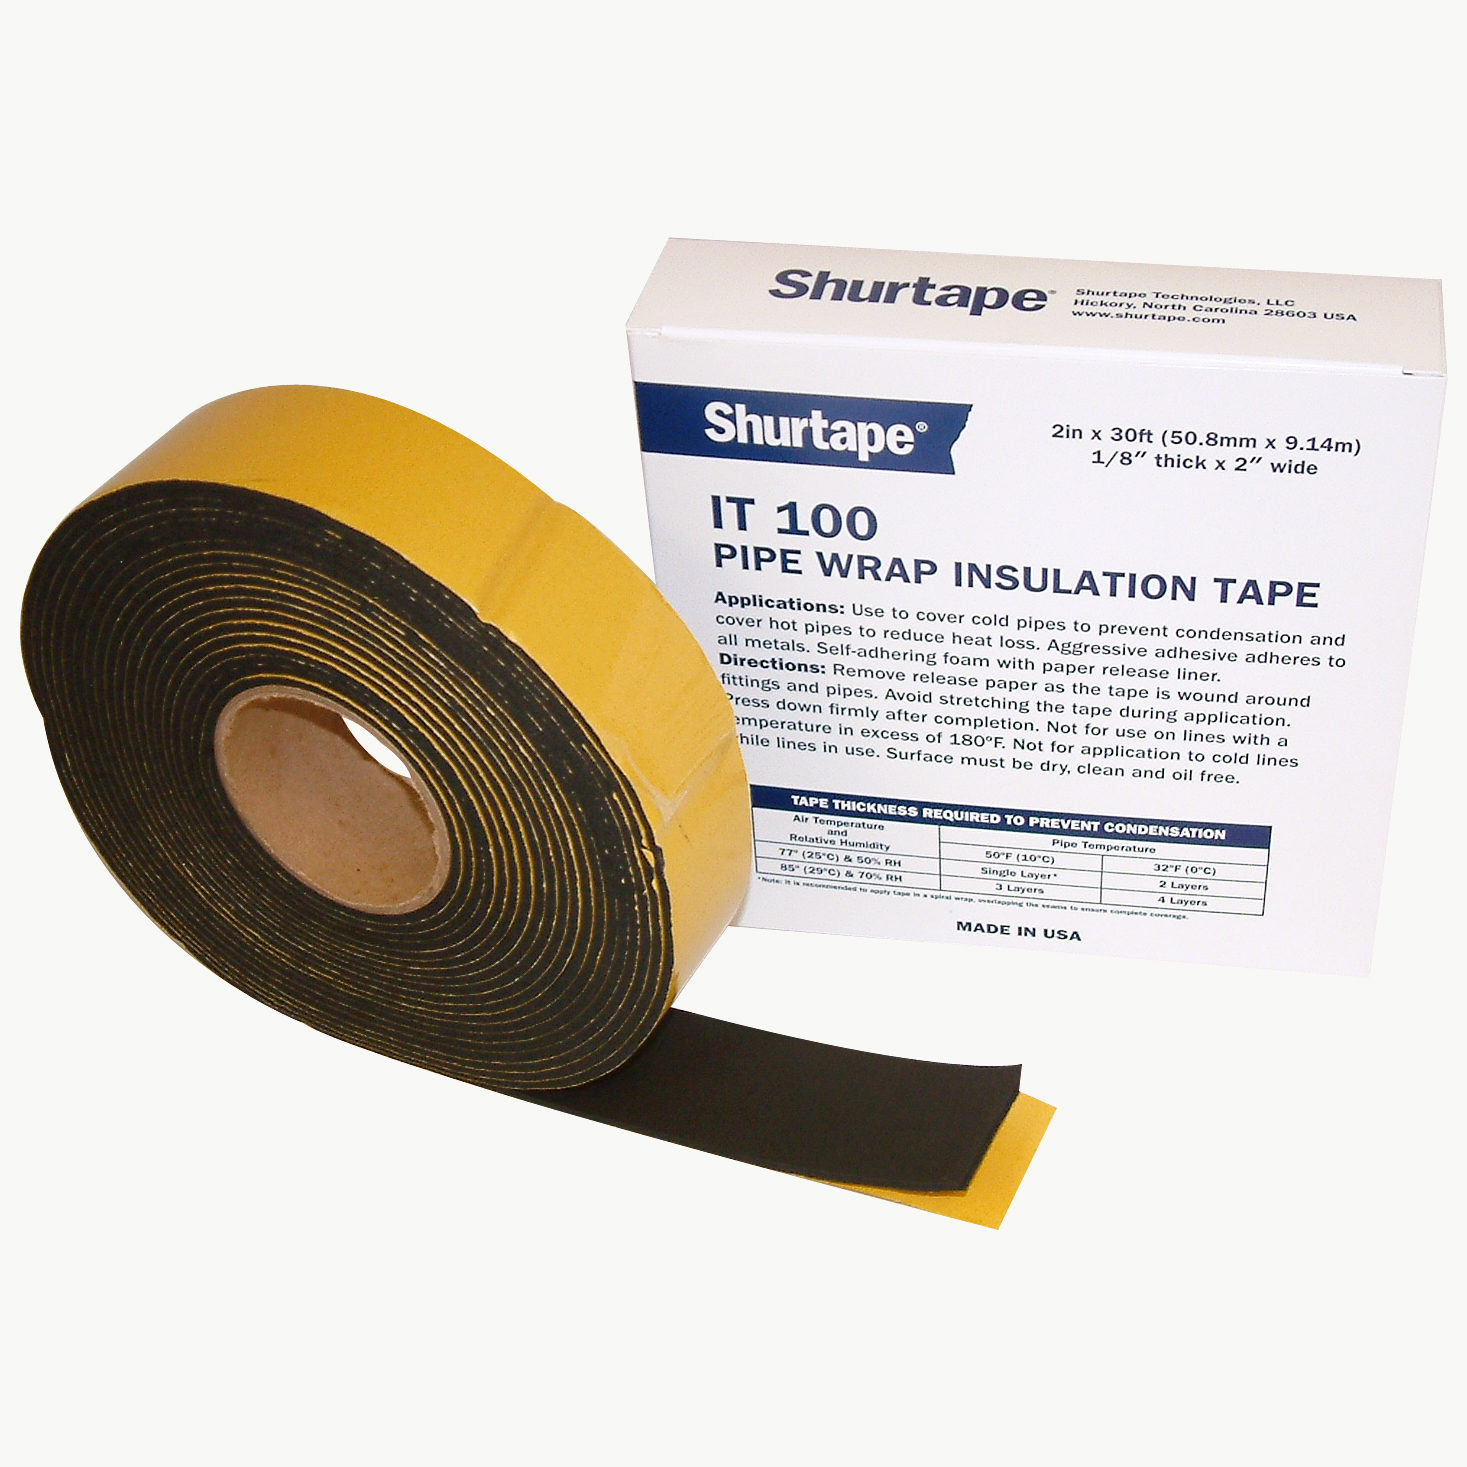 Shurtape Condensation-Inhibiting Foam Pipe Wrap Insulation Tape [Discontinued] (IT-100)